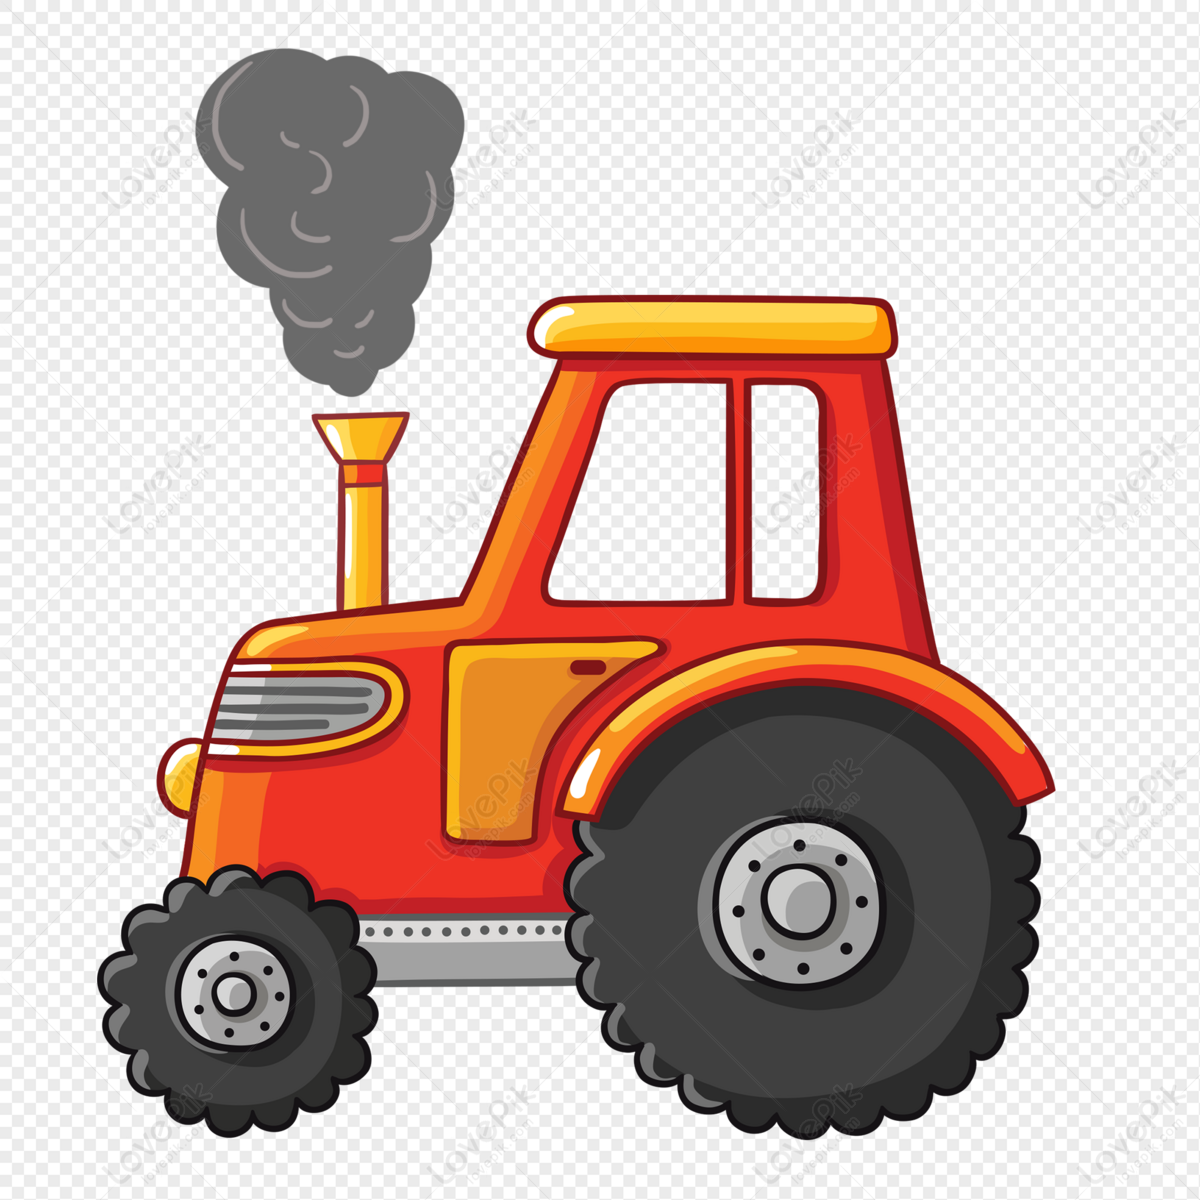 Cartoon Tractor PNG Transparent Image And Clipart Image For Free Download -  Lovepik | 401543007